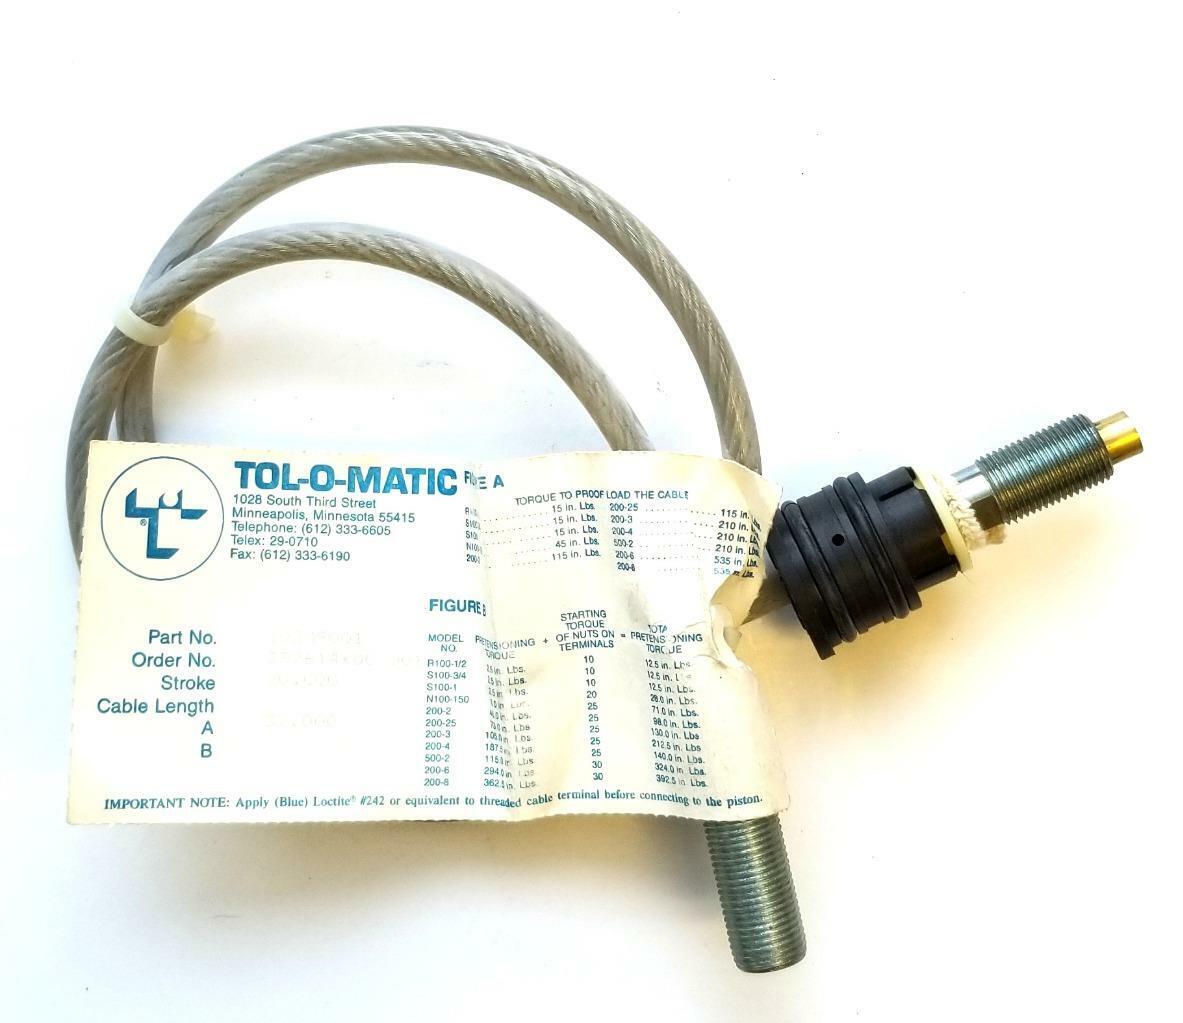 Tol-O-Matic 10249001 Cable Cylinder